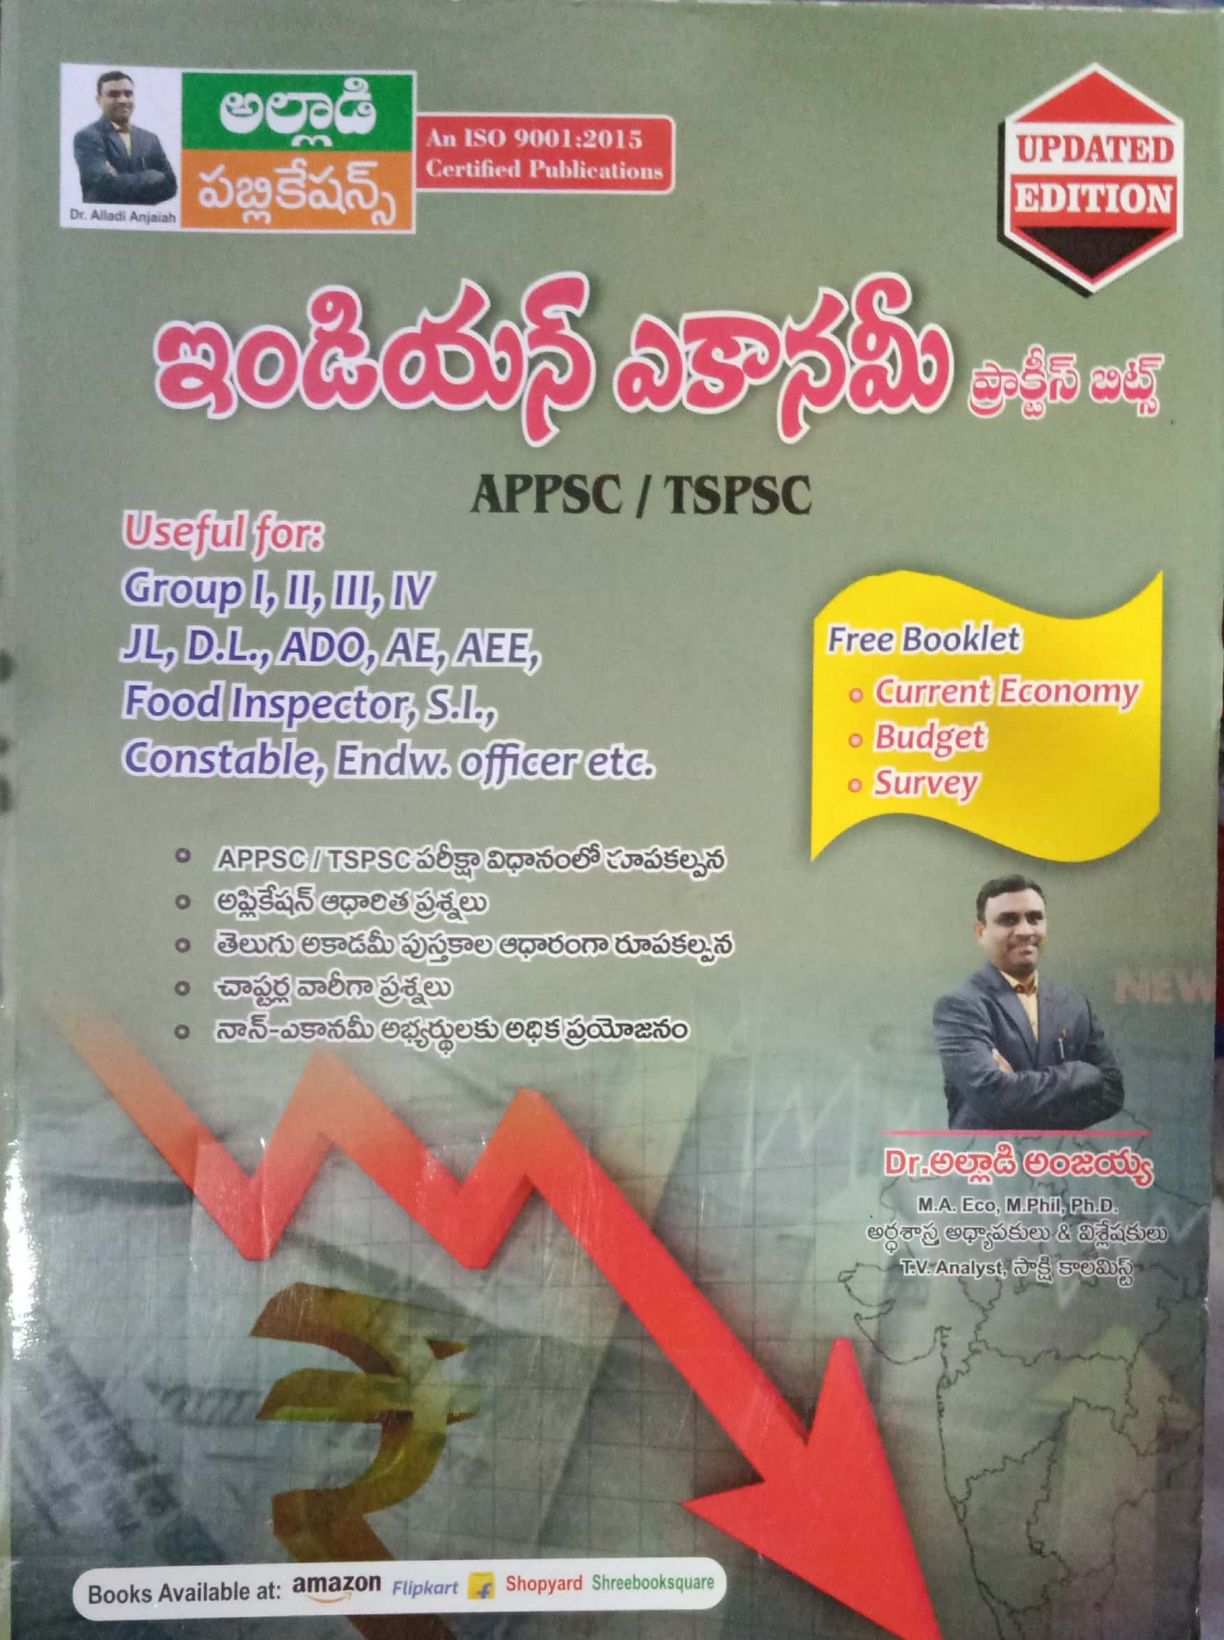 APPSC/TSPSC INDIAN ECONOMY Practice Bits 2022 BY DR ALLADI ANJAYYA SIR AS PER LATEST SYLLABUS CHAPTER WISE APPLICATION ORIENTED MCQS + FREE BOOKLET COVERED LATEST BUDGET, SURVEY, CURRENT ECONOMY. [TELUGU MEDIUM] SEPTEMBER 2022 EDITION